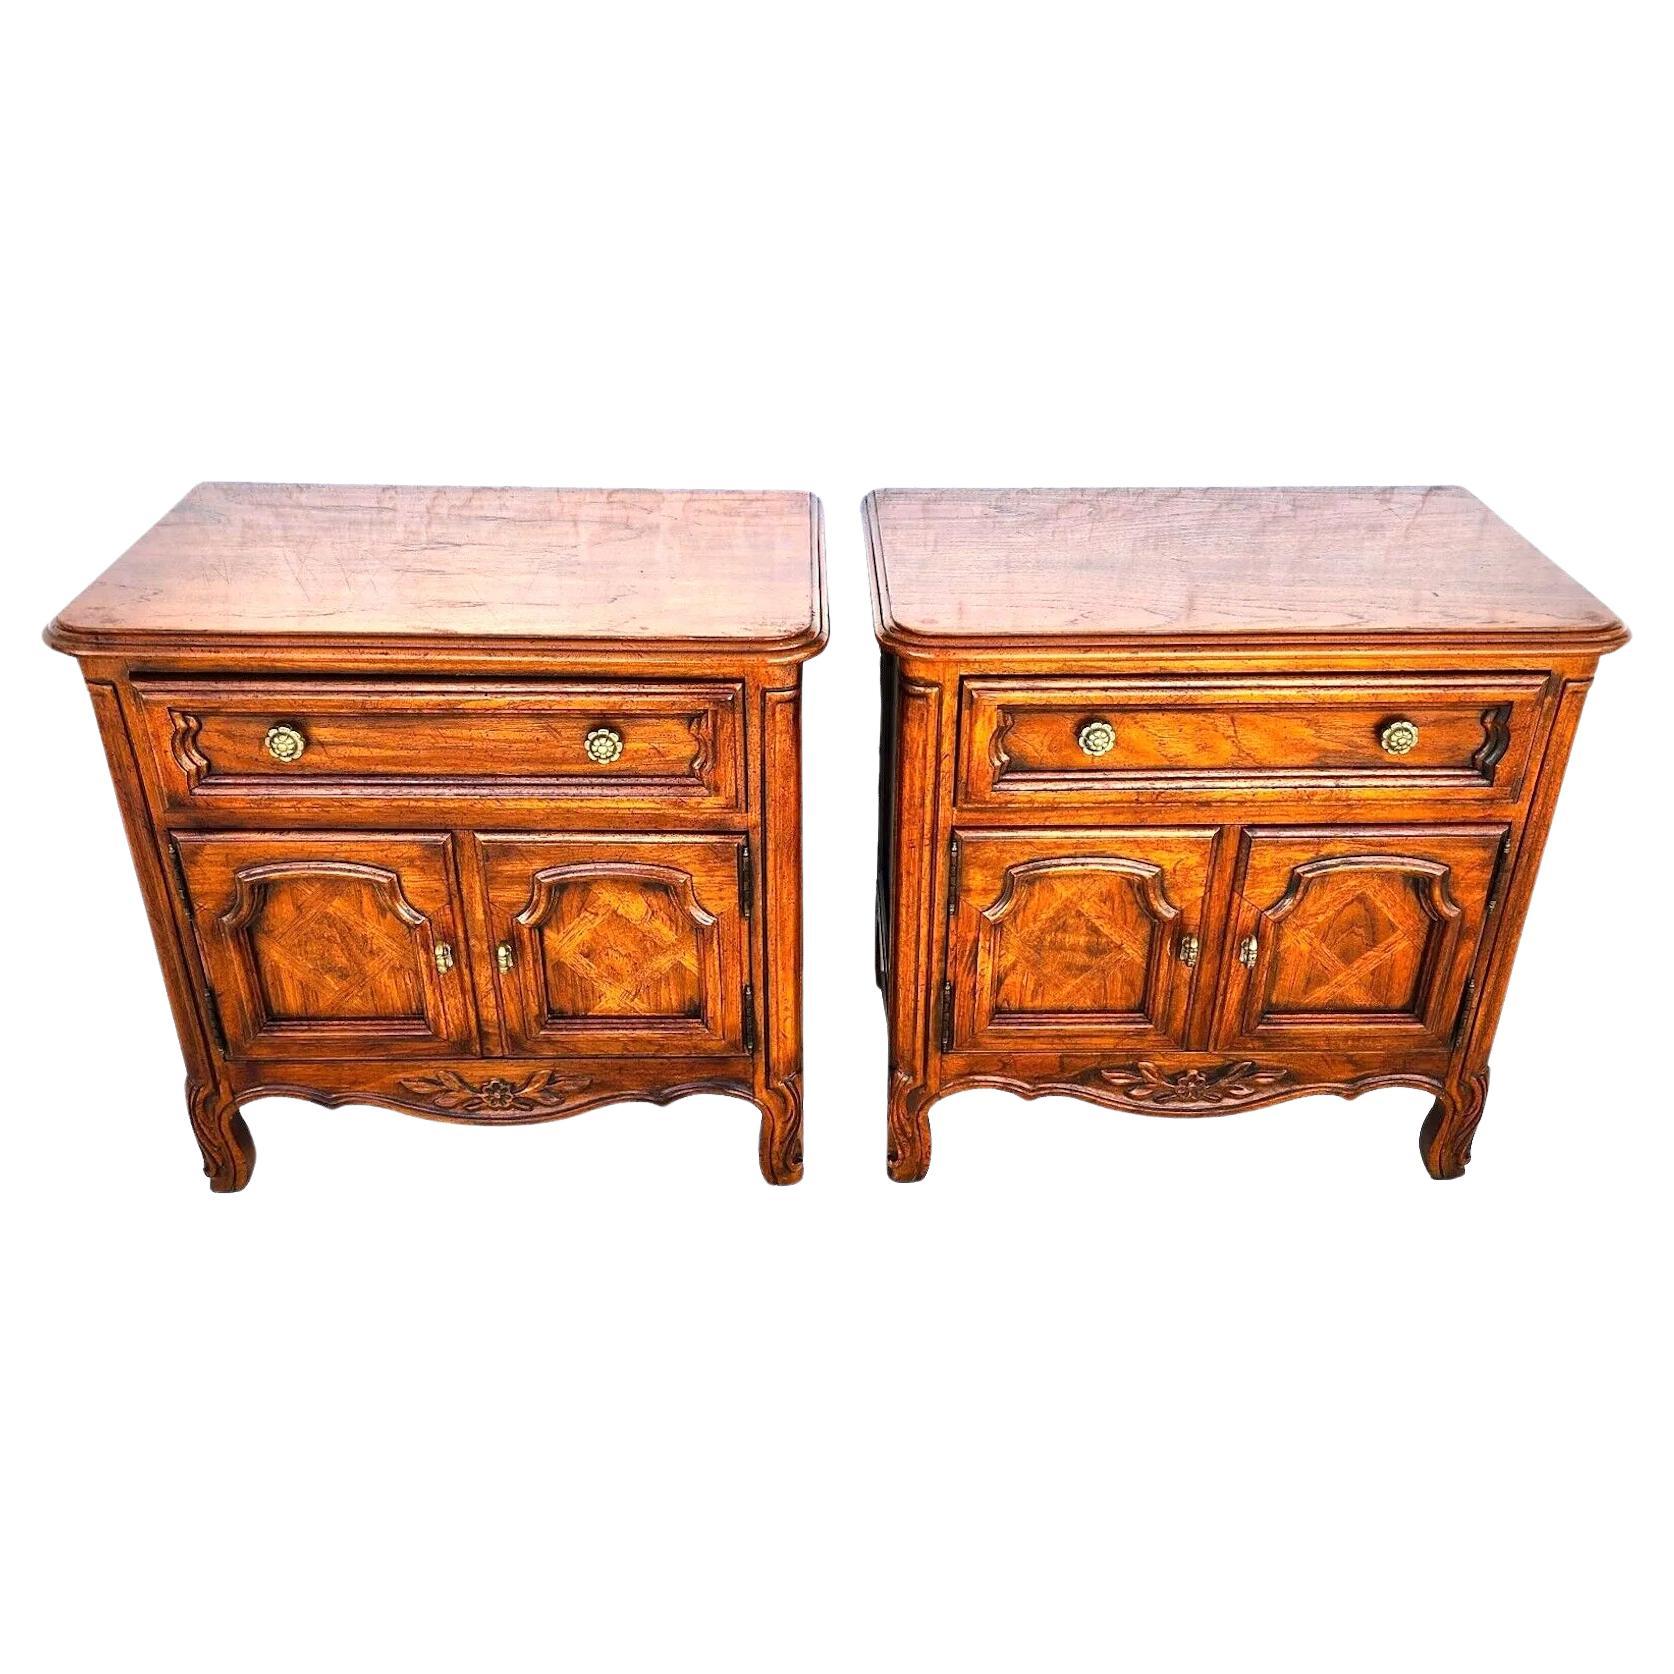 French Provincial Cabernet Nightstands by Drexel Pair